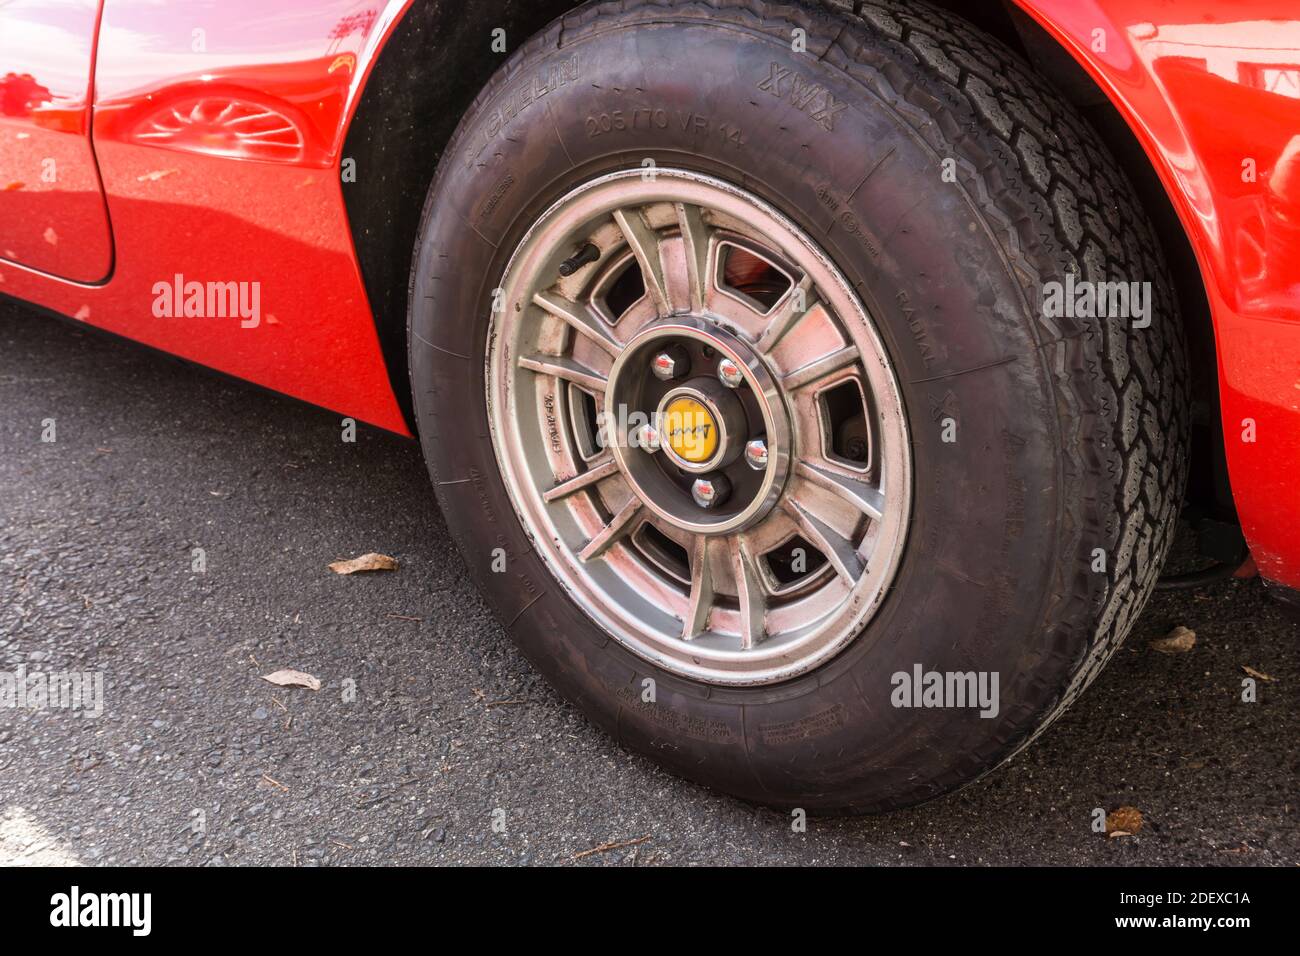 Close up detail of the alloy wheel and tyre on a red 1970s Ferrari Dino 246 GT sports car Stock Photo